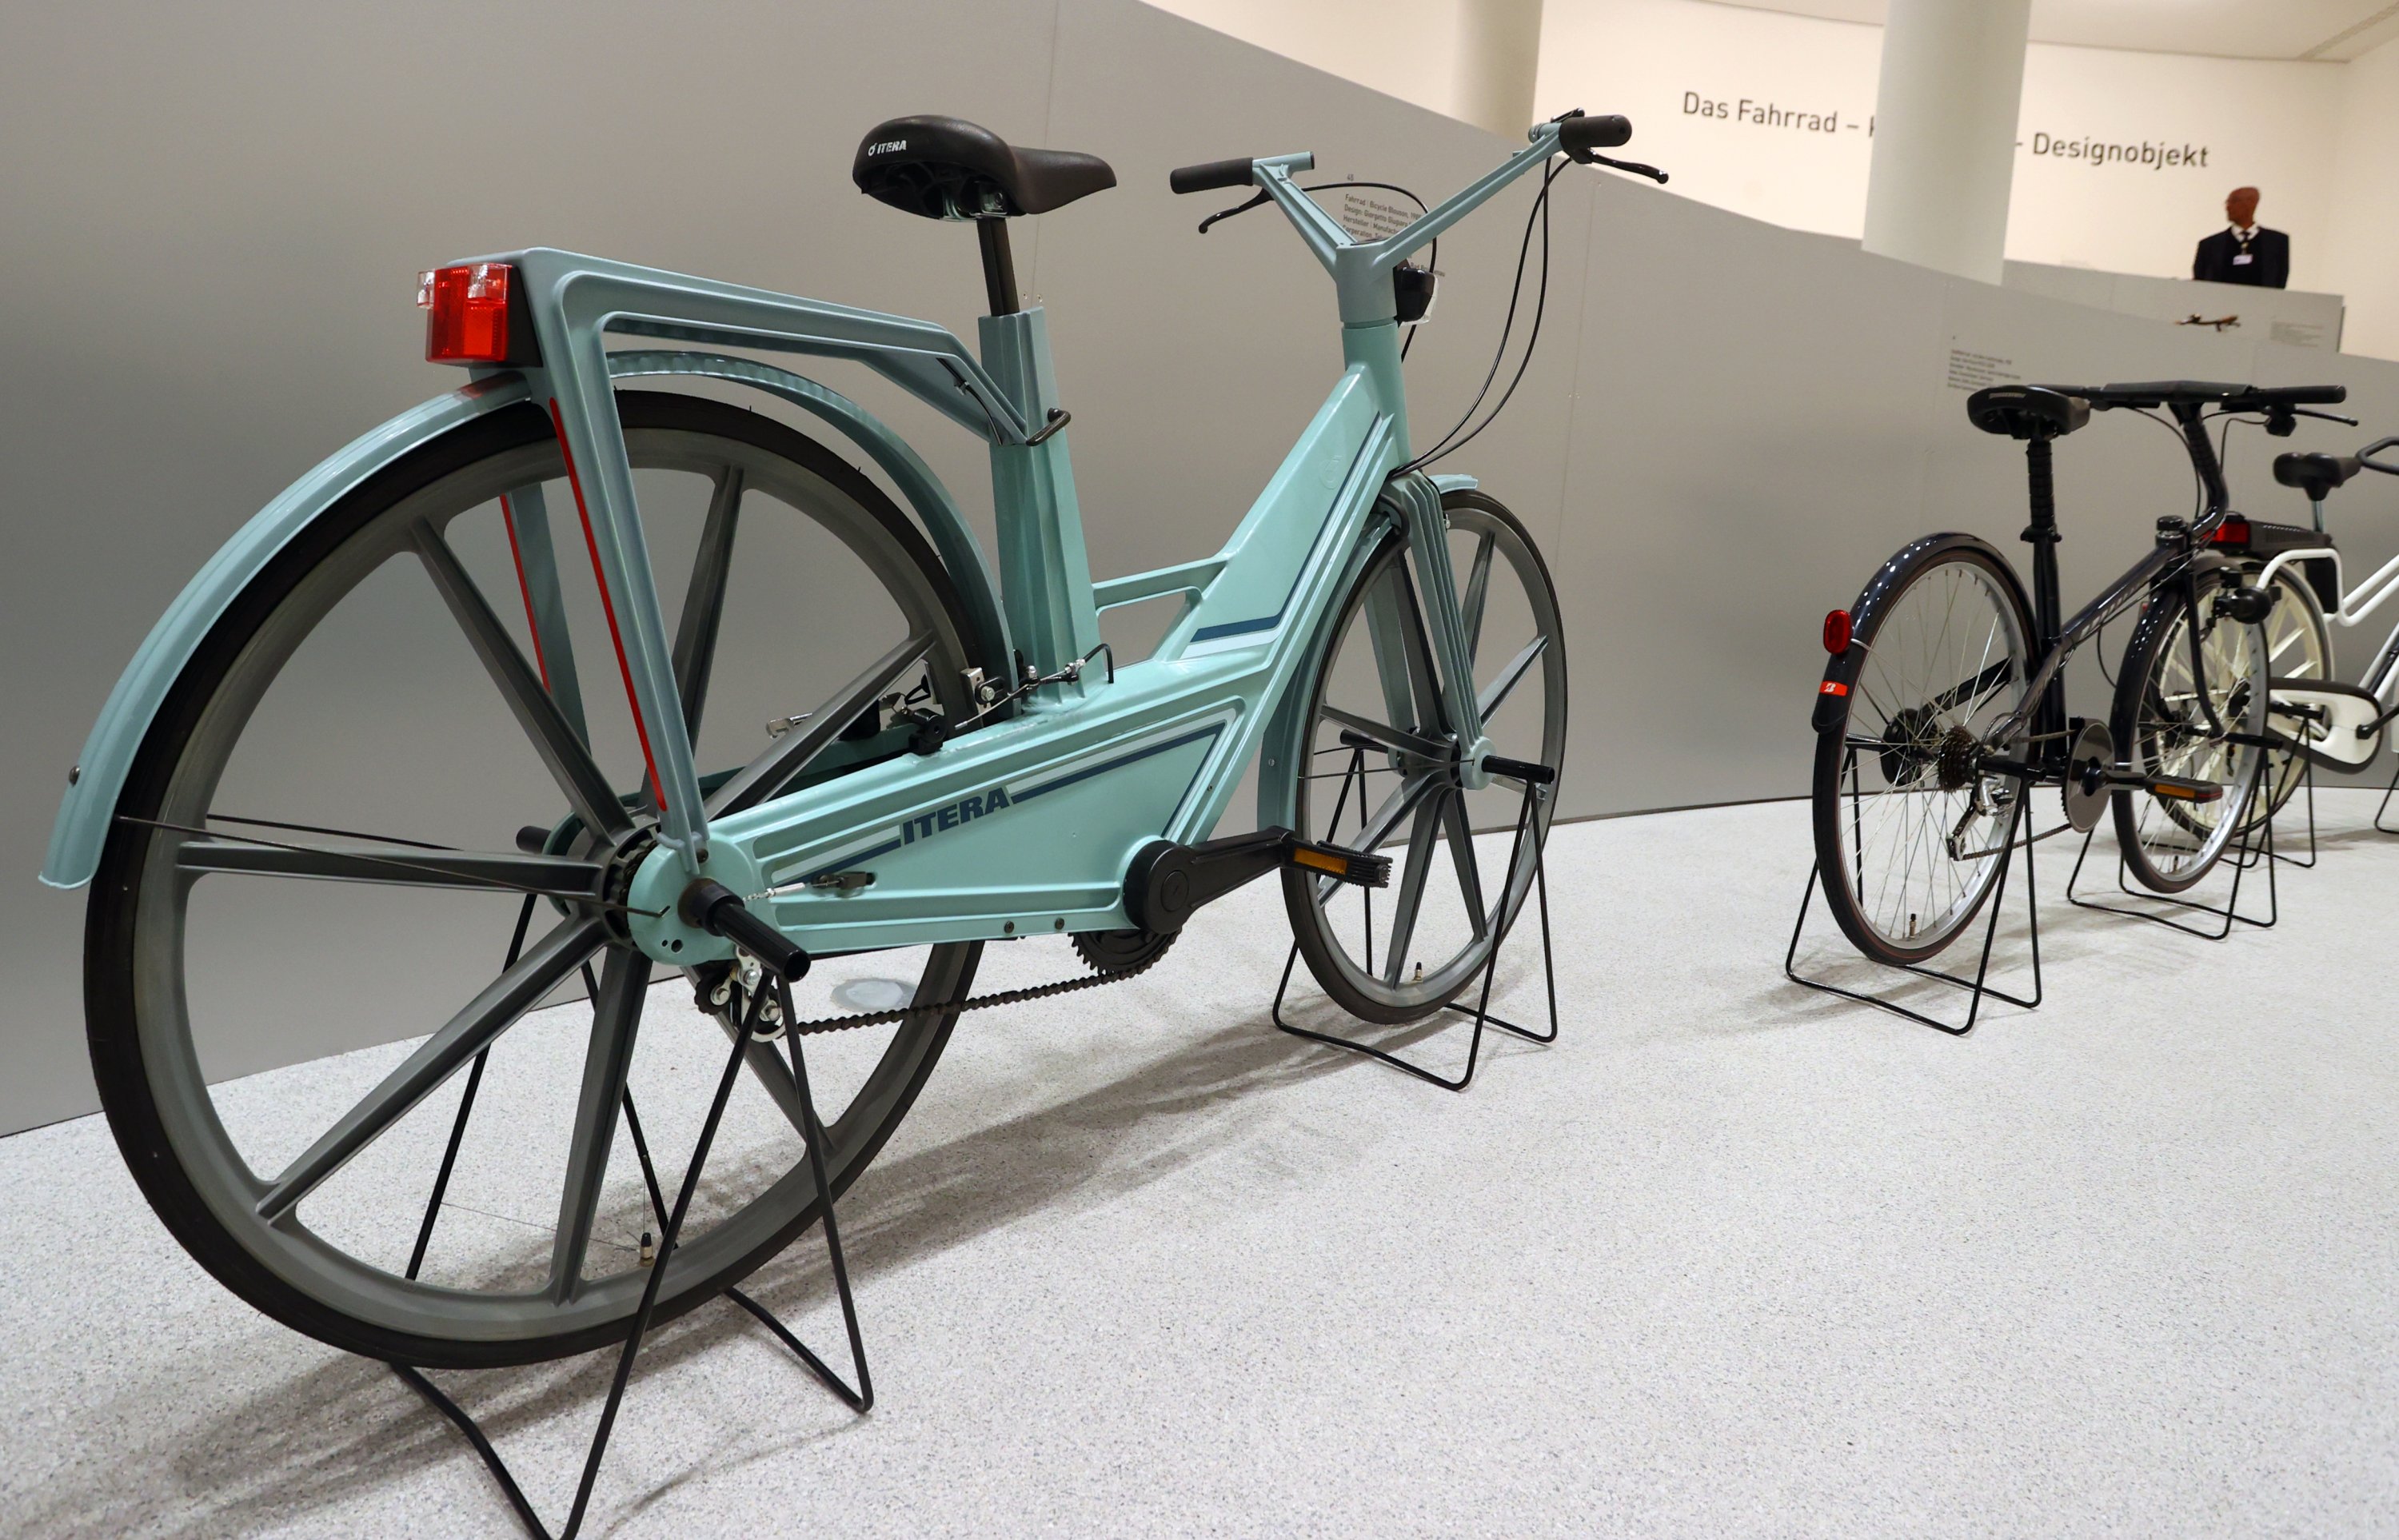 A Swedish plastic bicycle from 1980/1982. A selection of 70 of the world's most ground-breaking and iconic bicycle designs are on display in Munich, Germany, Nov. 11, 2022. (dpa Photo)